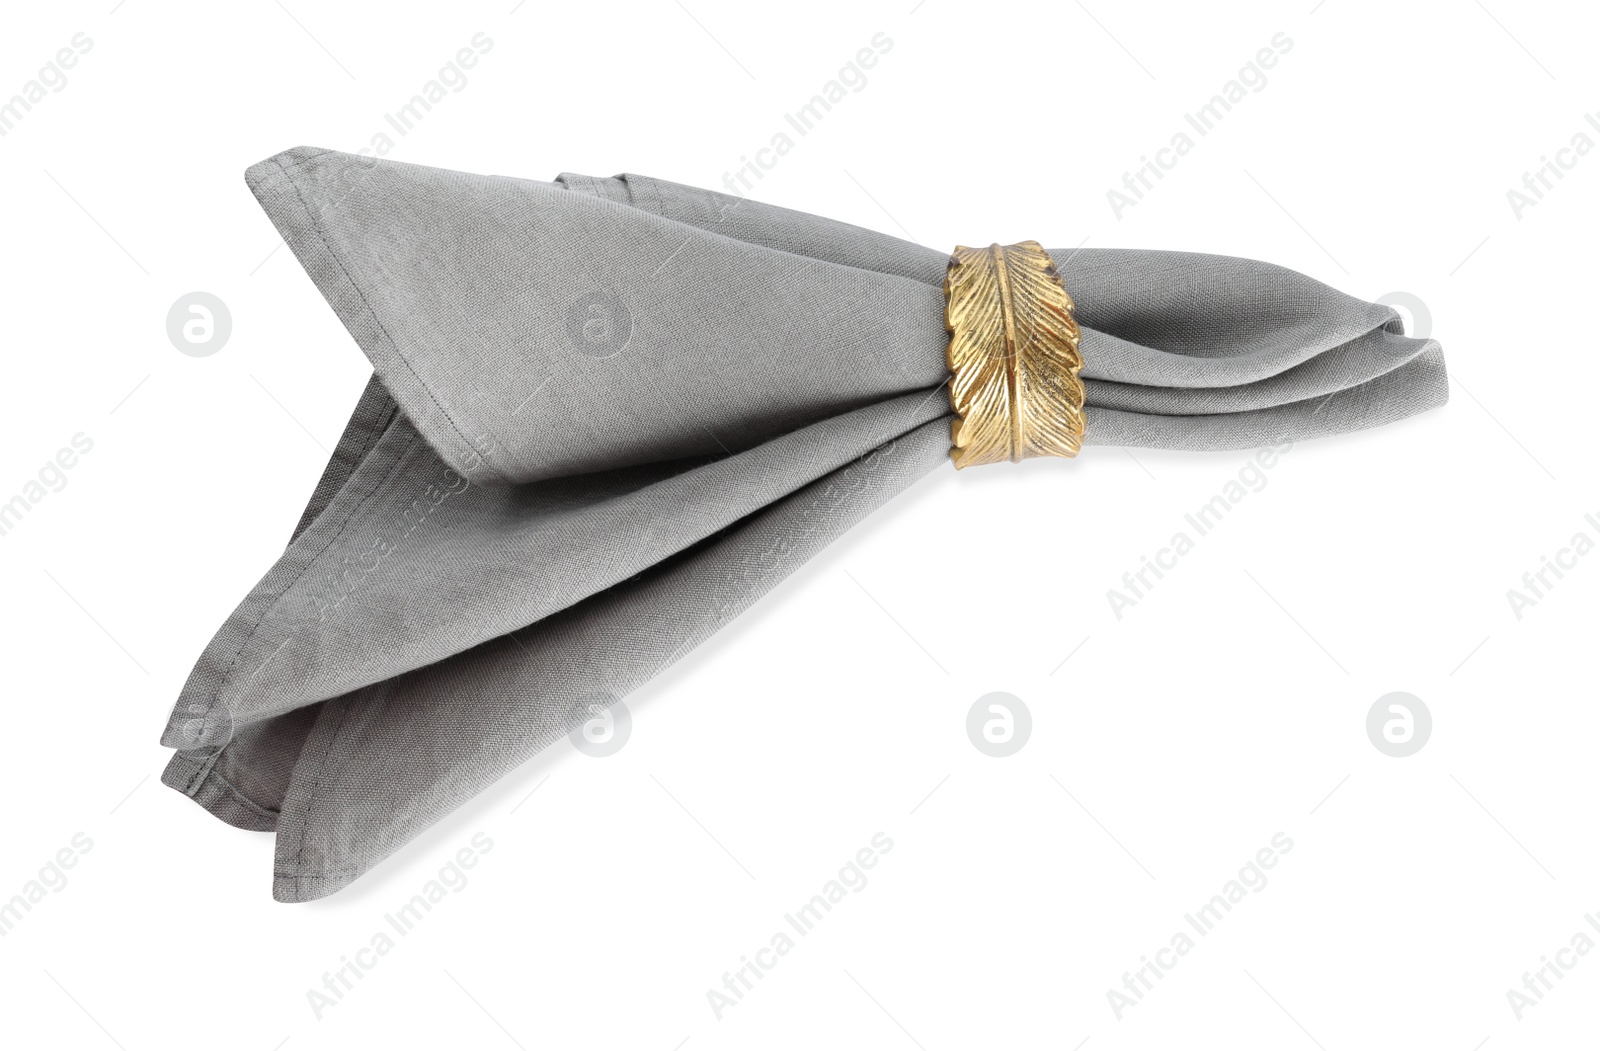 Photo of Napkin with decorative ring for table setting isolated on white, top view